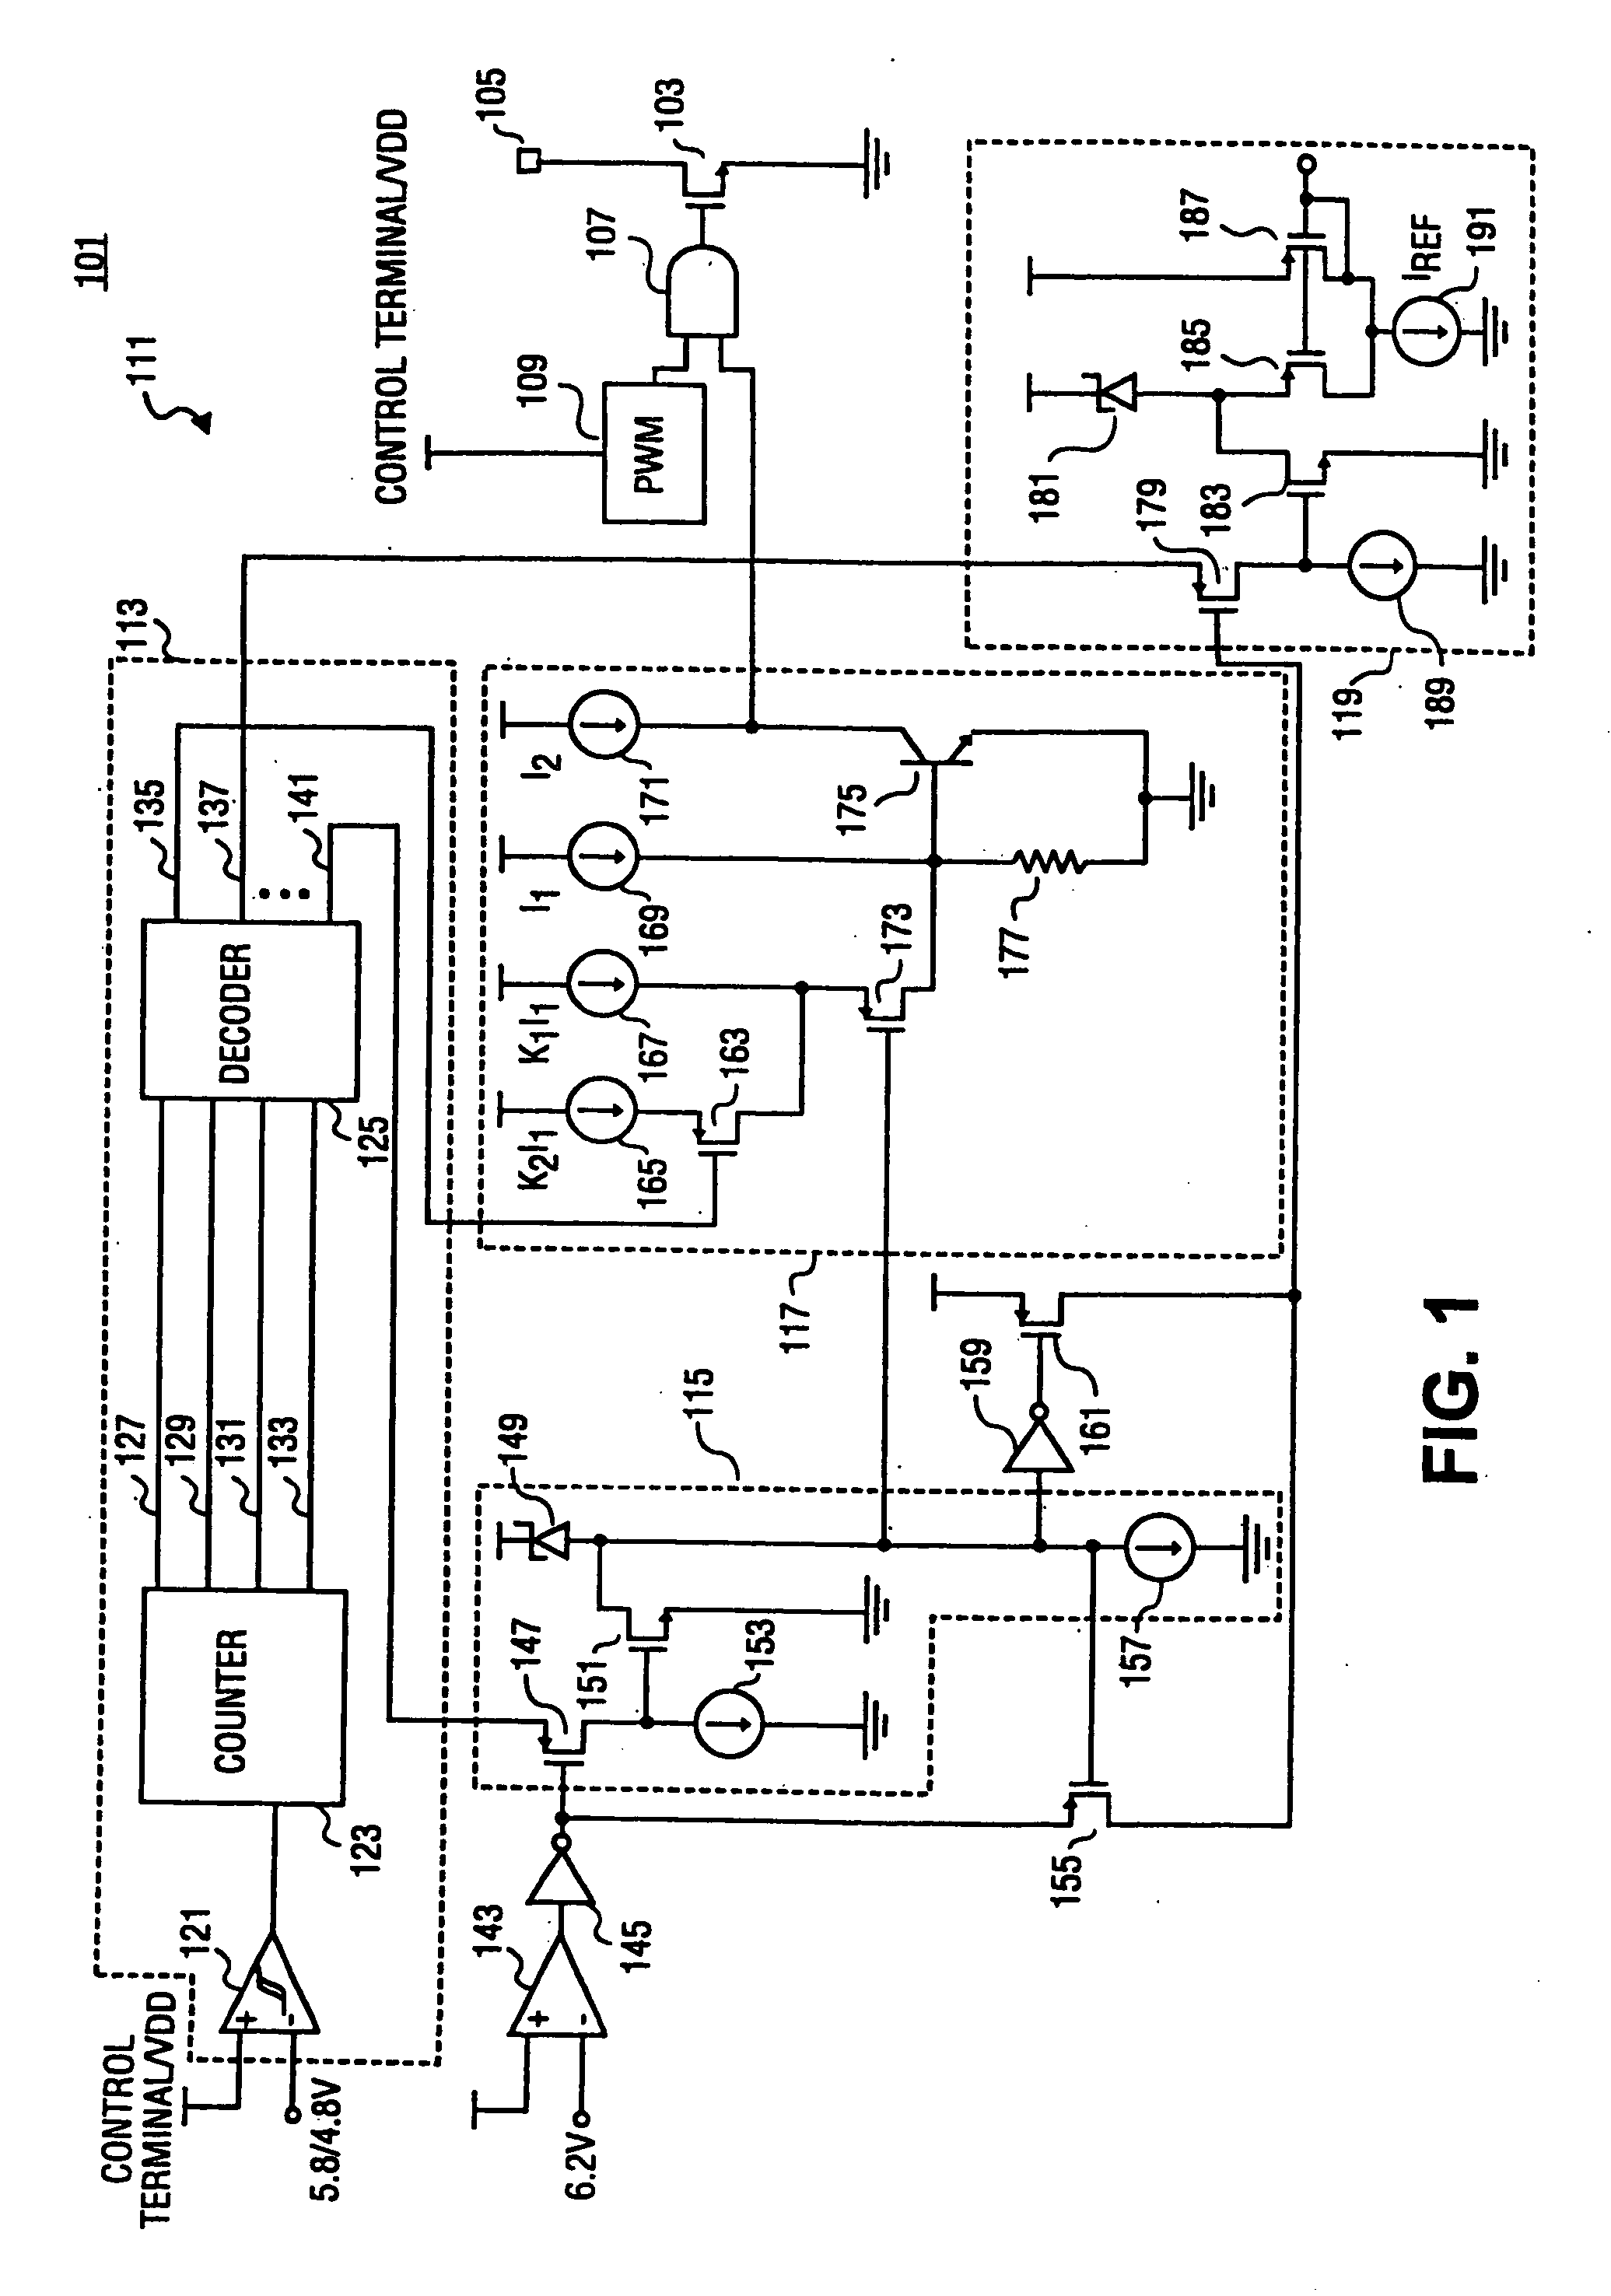 Method and apparatus providing final test and trimming for a power supply controller